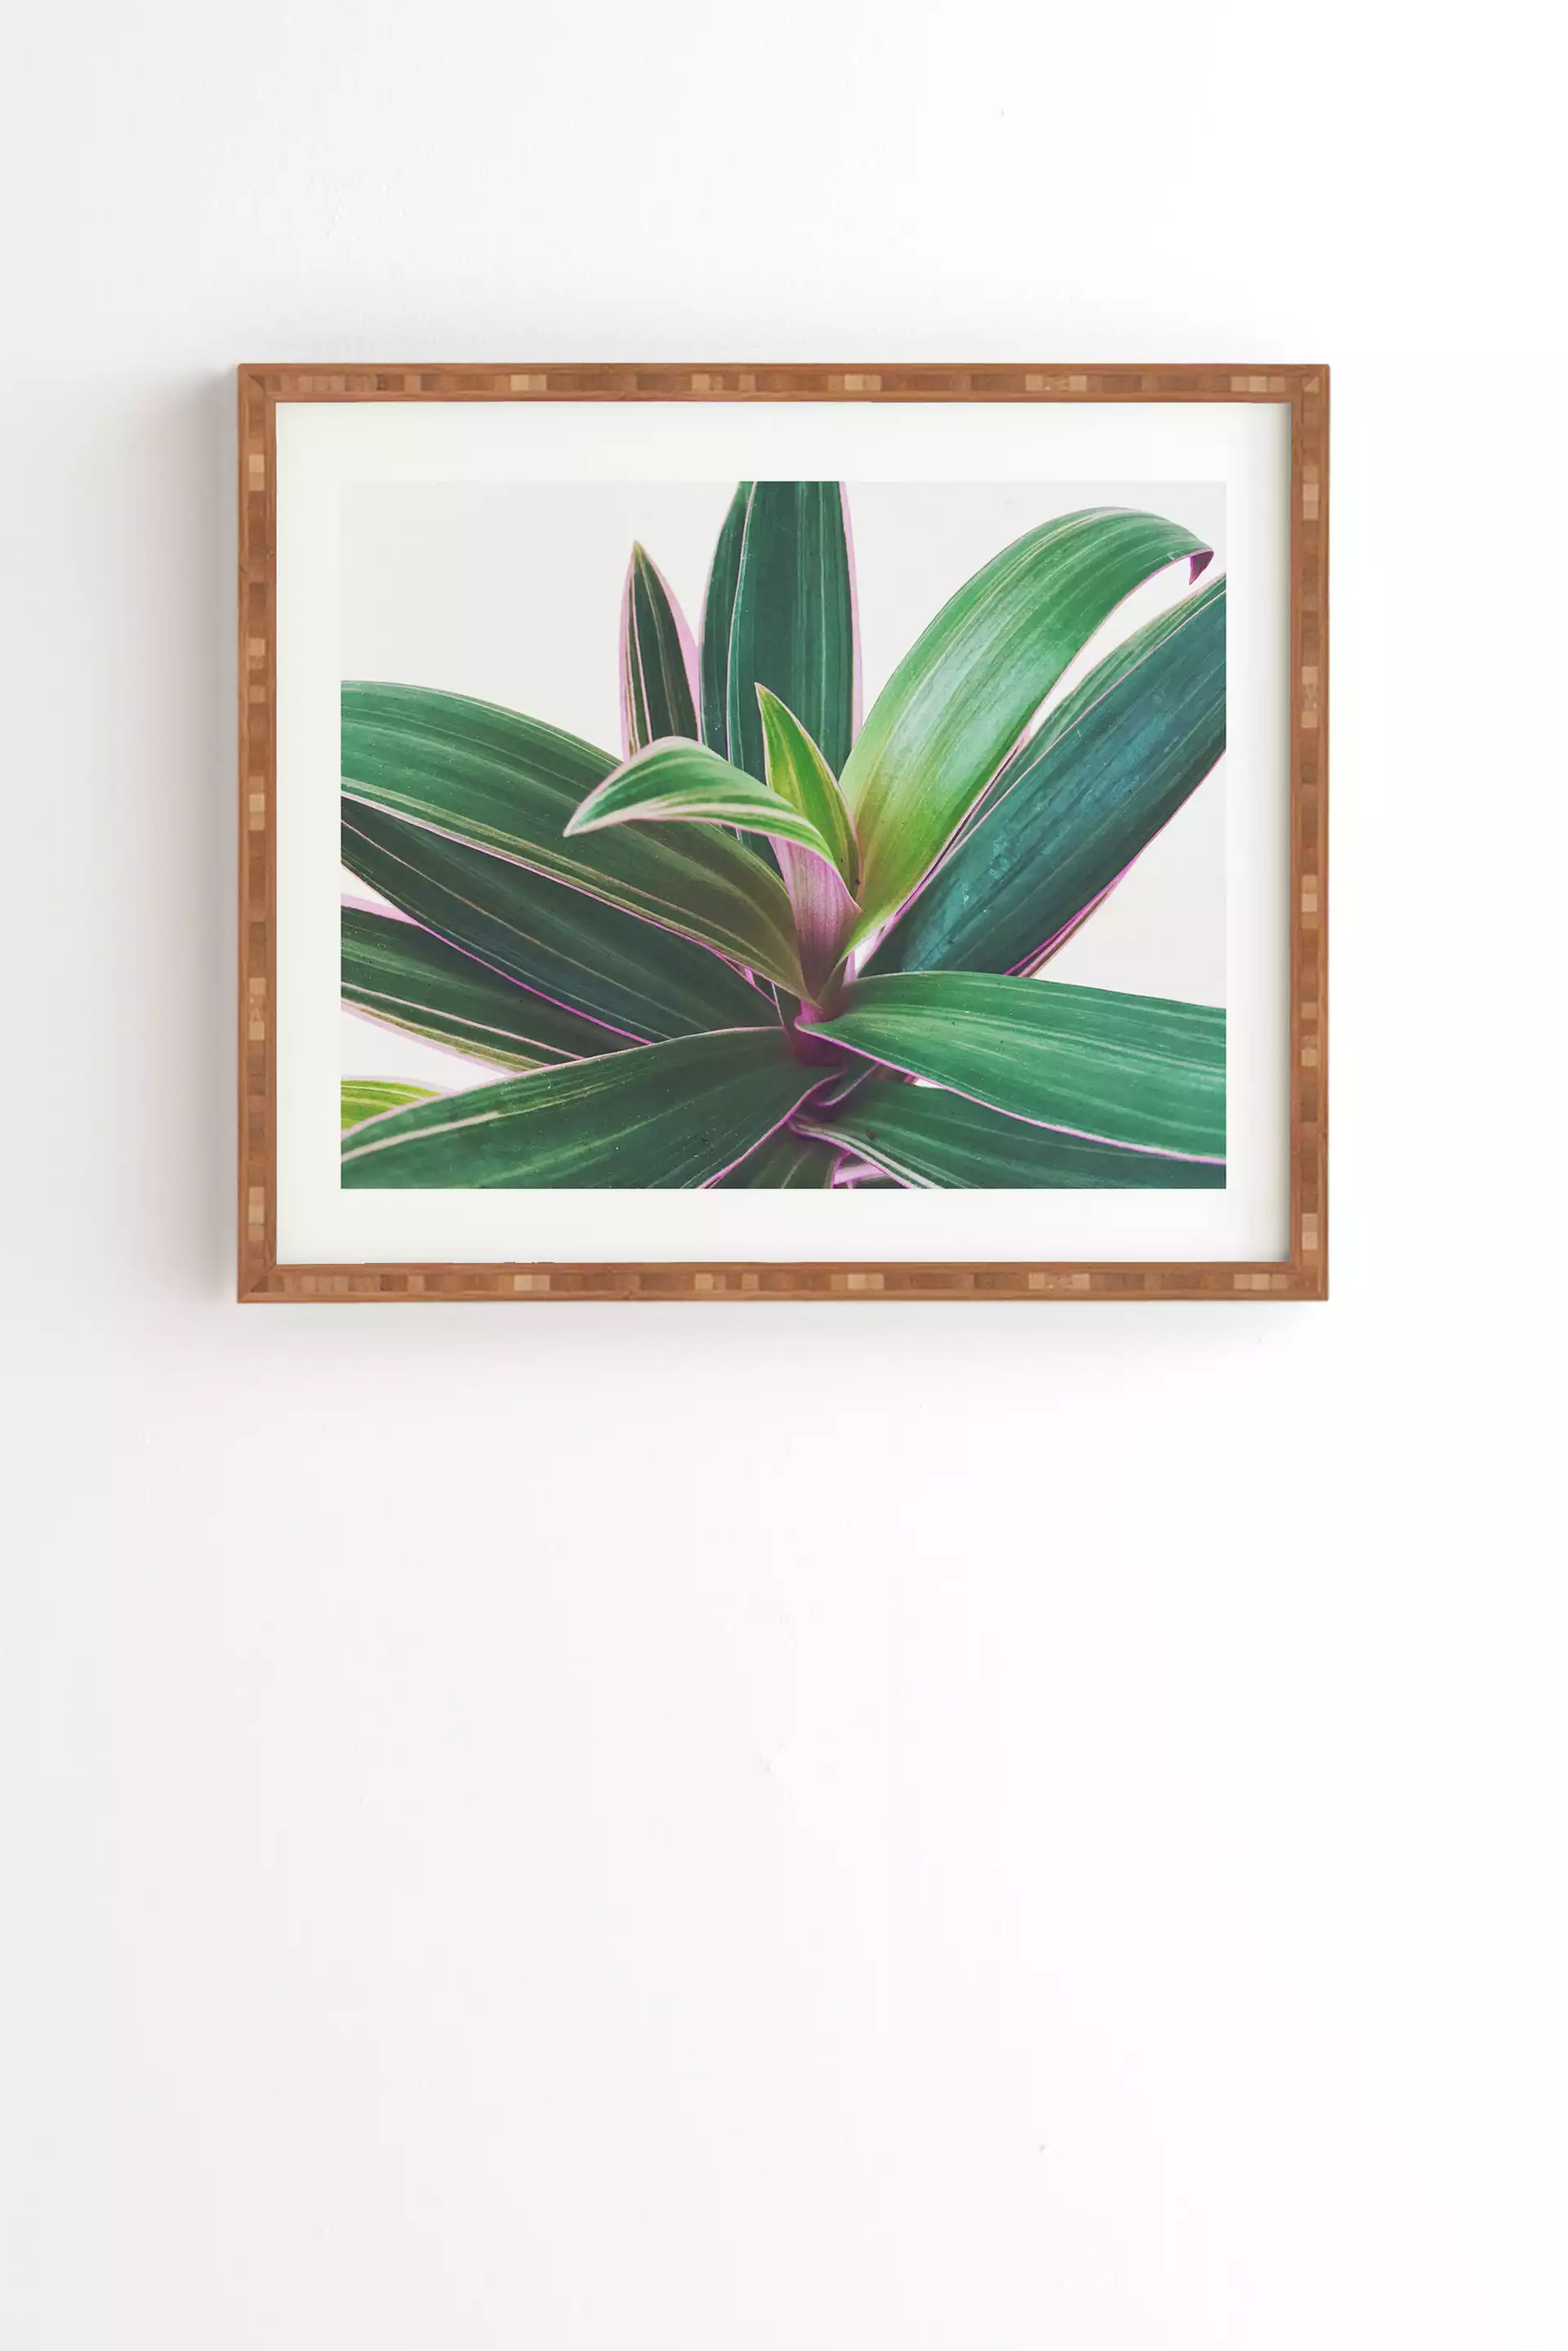 Oyster Plant by Cassia Beck - Framed Wall Art Bamboo 11" x 13"